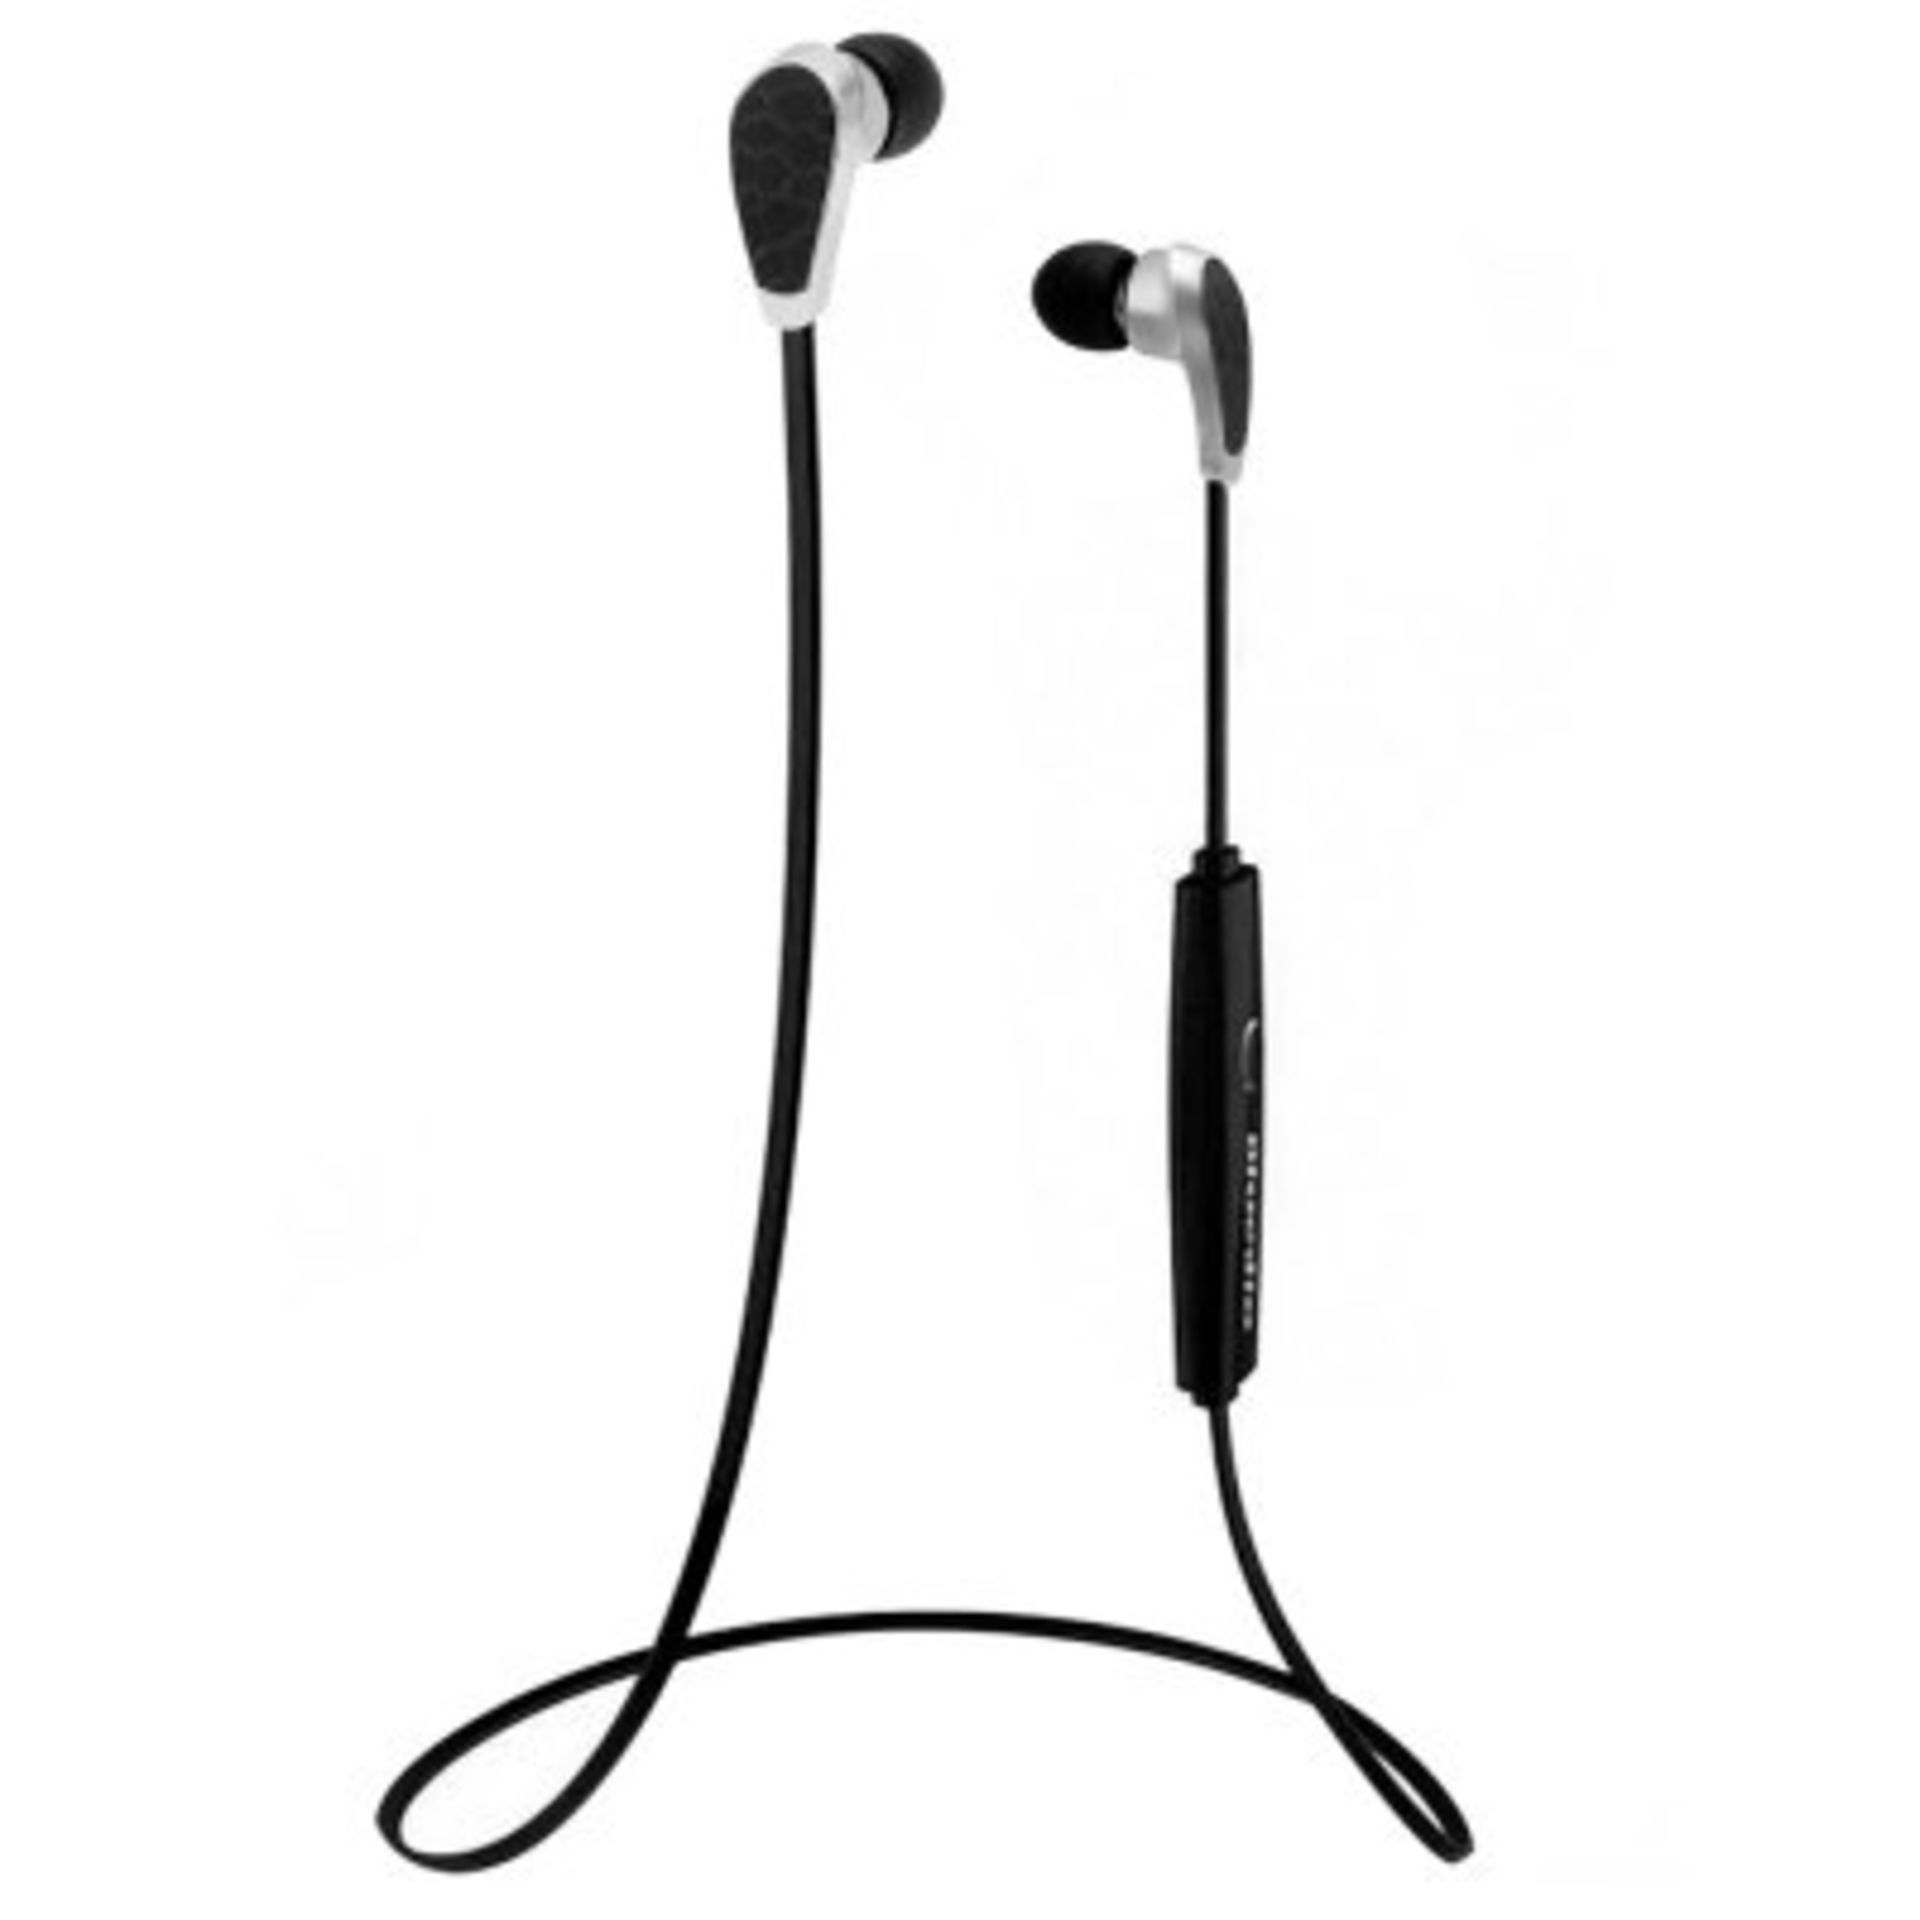 V Brand New Pair of Bluetooth Earphones/Headset (All Boxed) - Colours and Styles/Makes May Vary - - Image 5 of 7